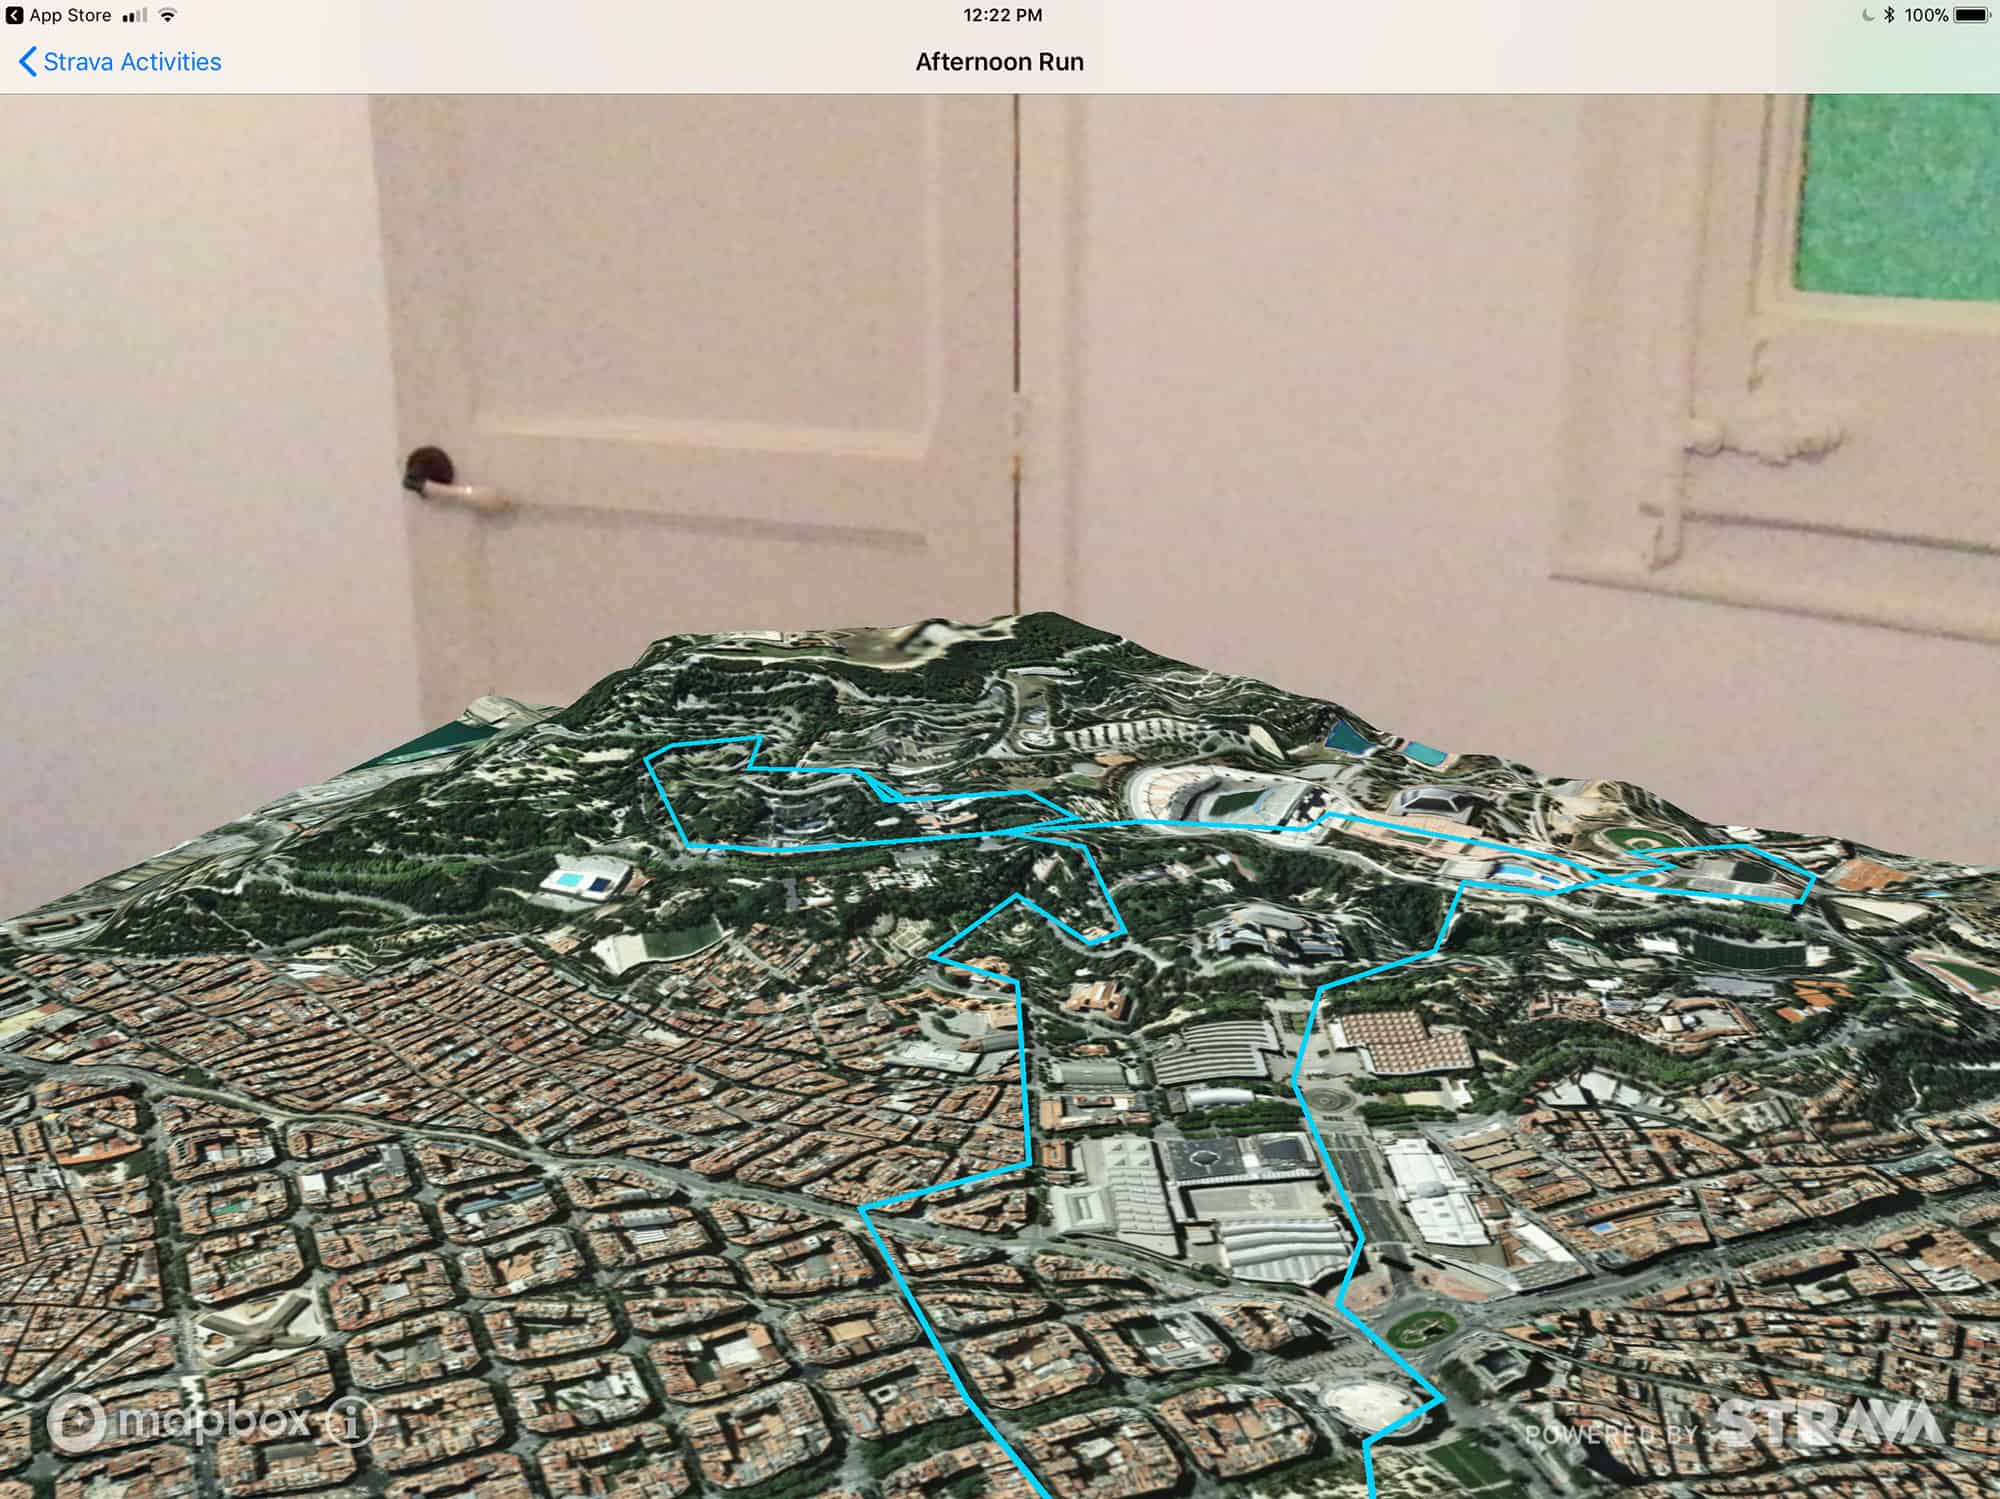 Fitness AR lets you visualize your hill running routes in 3D with augmented reality